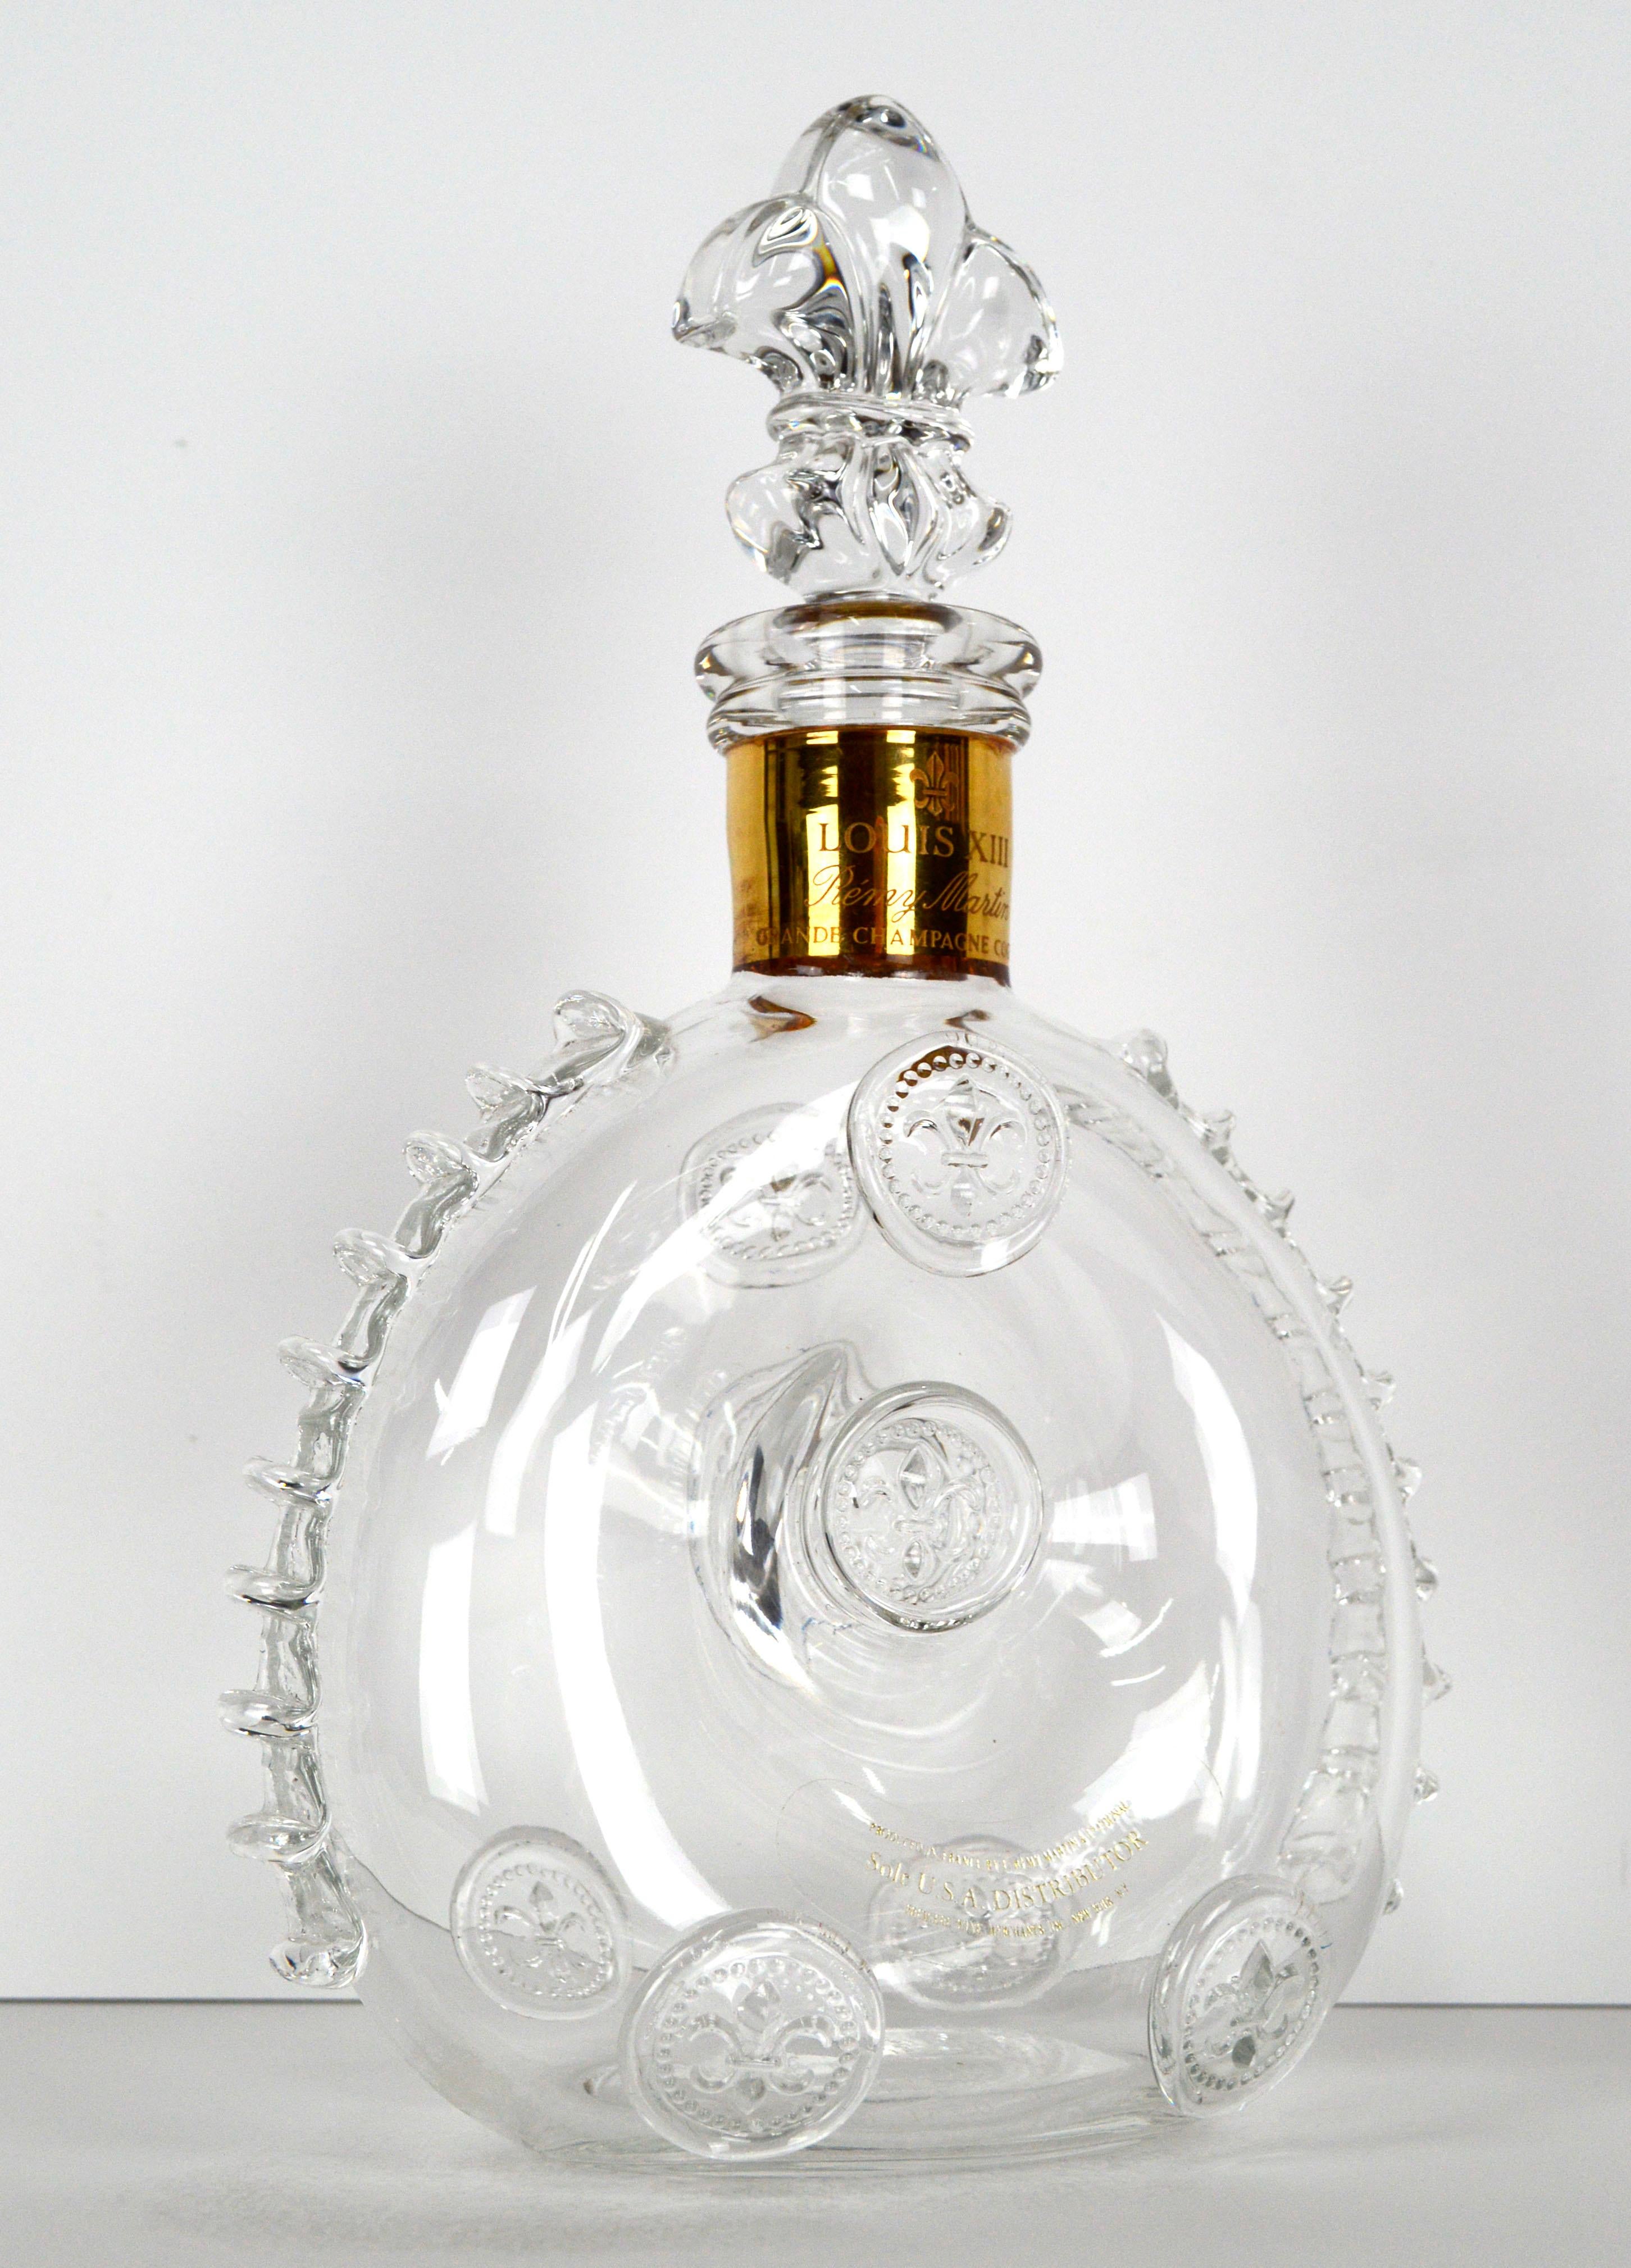 Magnificent Remy Martin Louis XIII Baccarat crystal cognac decanter bottle with stopper, by fine crystal manufacturer Baccarat (French, founded 1764). Remy Martin Baccarat Crystal mark is etched on base, with number x5432. The ornate stopper and